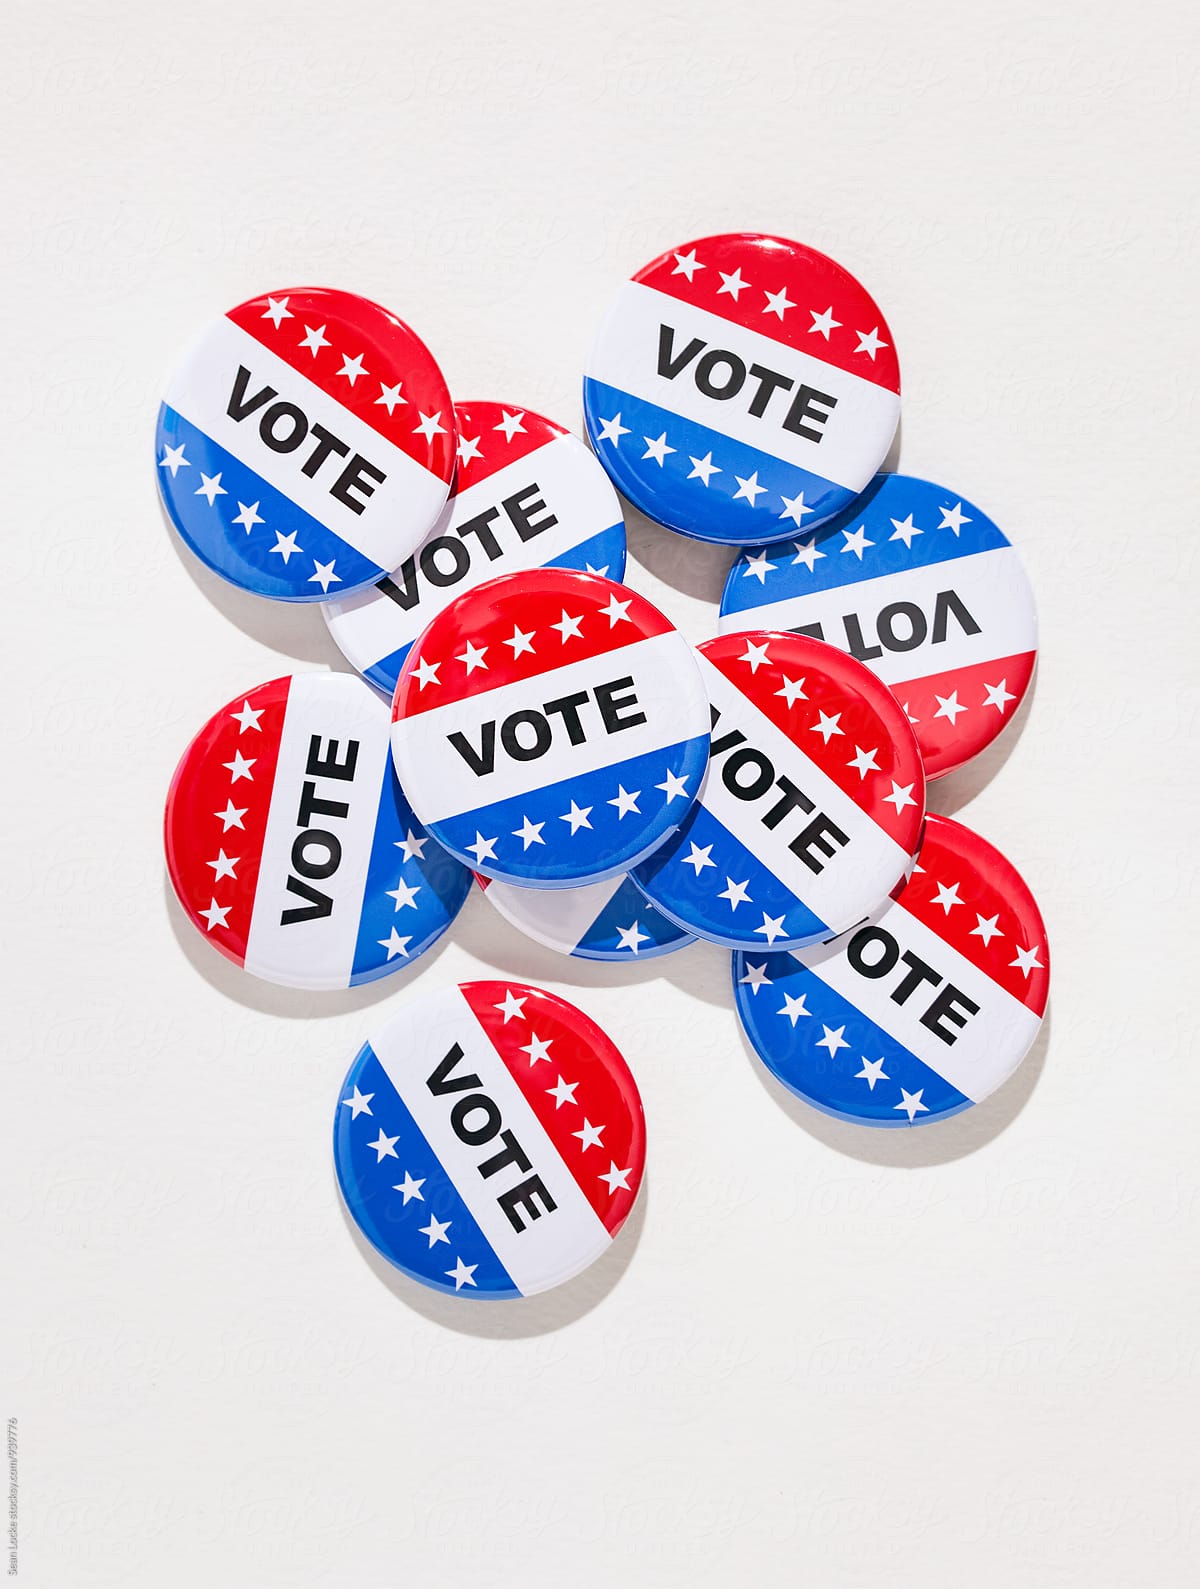 Vote: Pile Of Voting Pins On White Textured Background